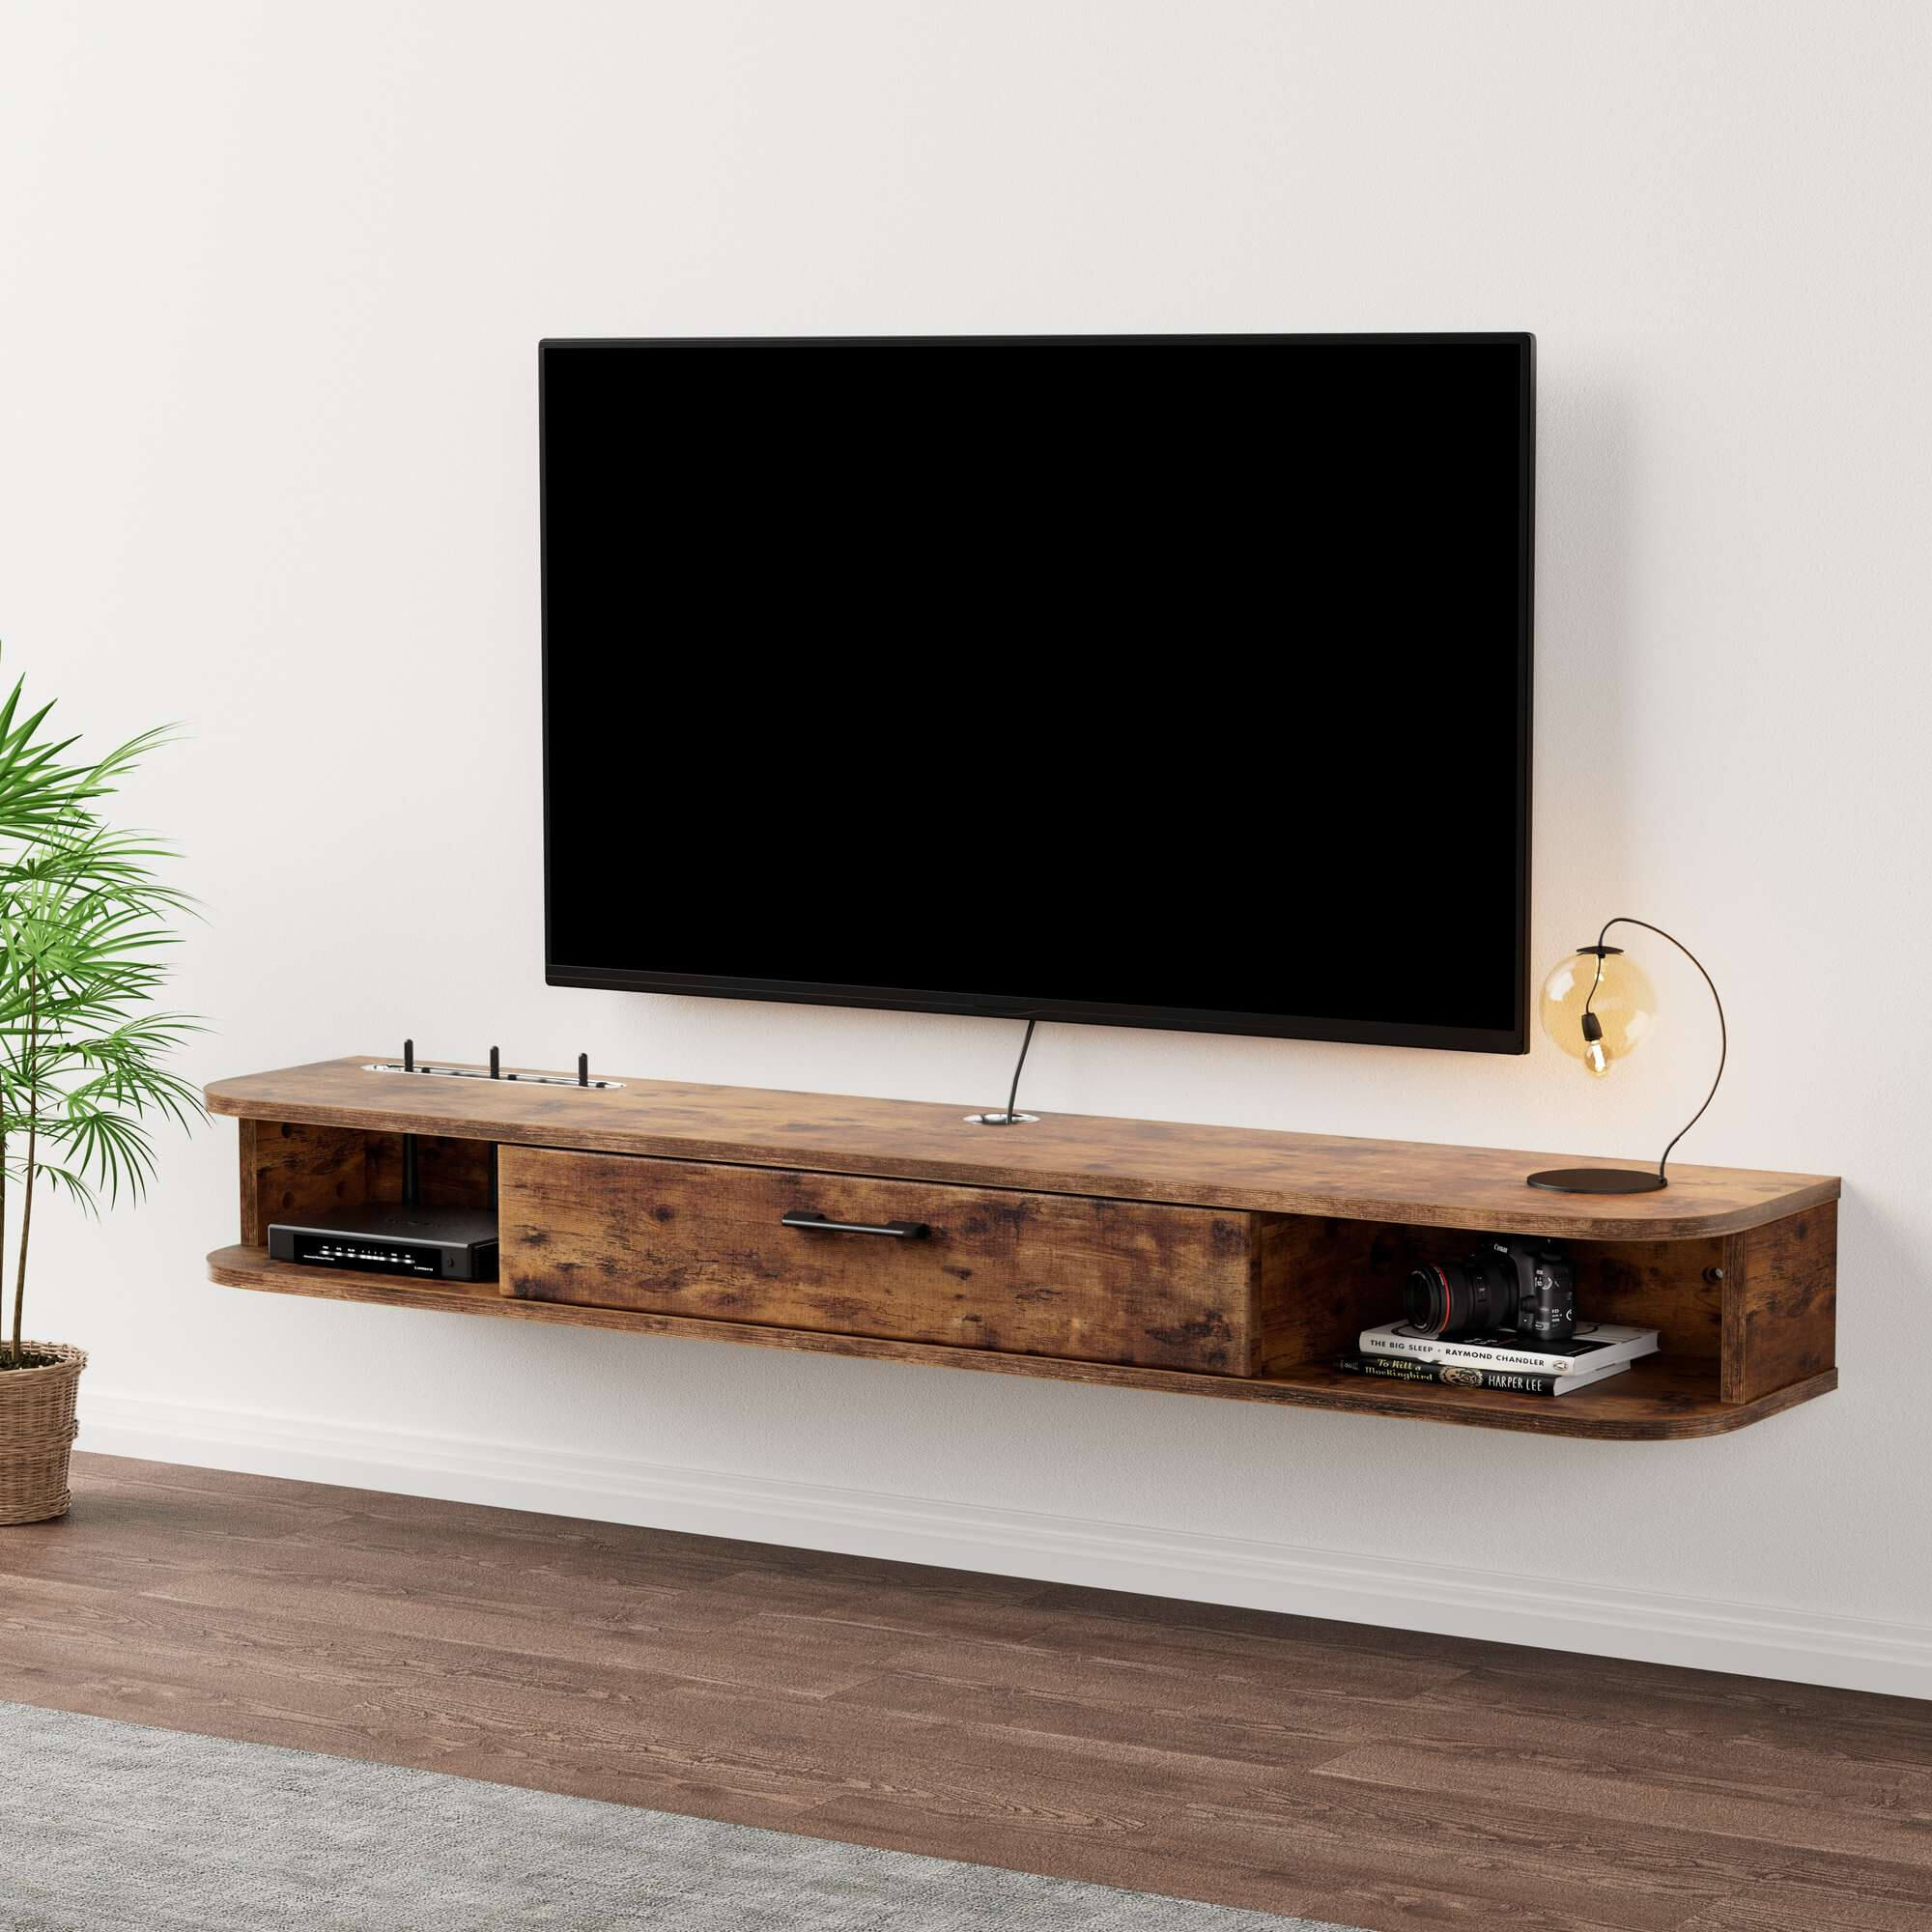 55.12" Rustic Brown Plywood Slim Floating TV Cabinet for 55" 60" TV